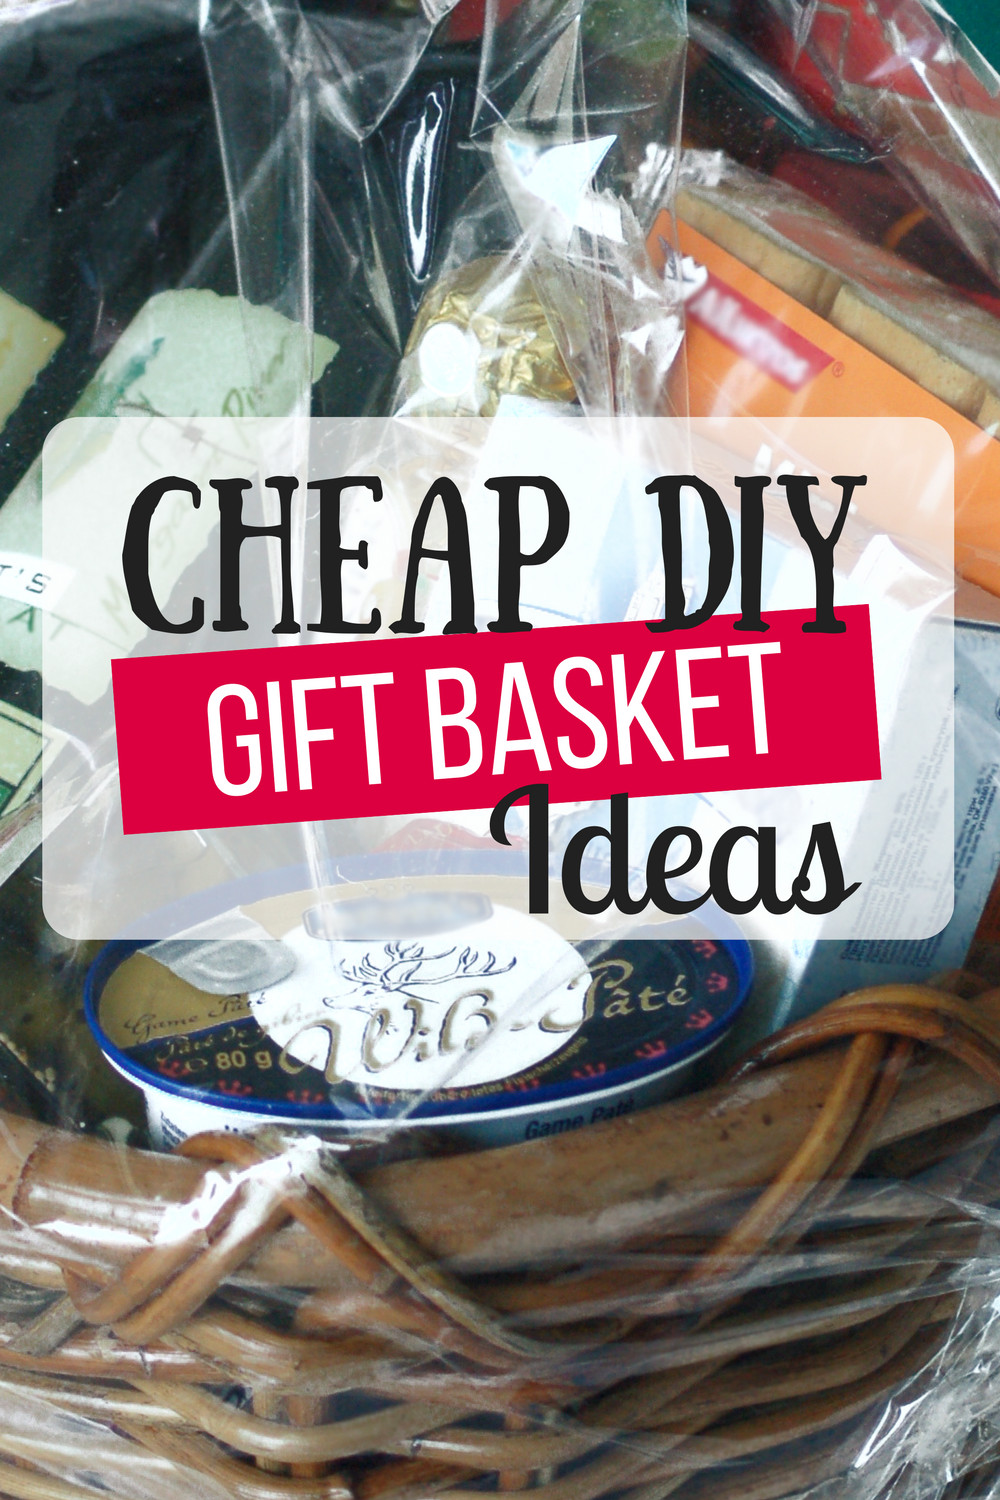 Cooking Gift Basket Ideas
 Cheap DIY Gift Baskets The Busy Bud er